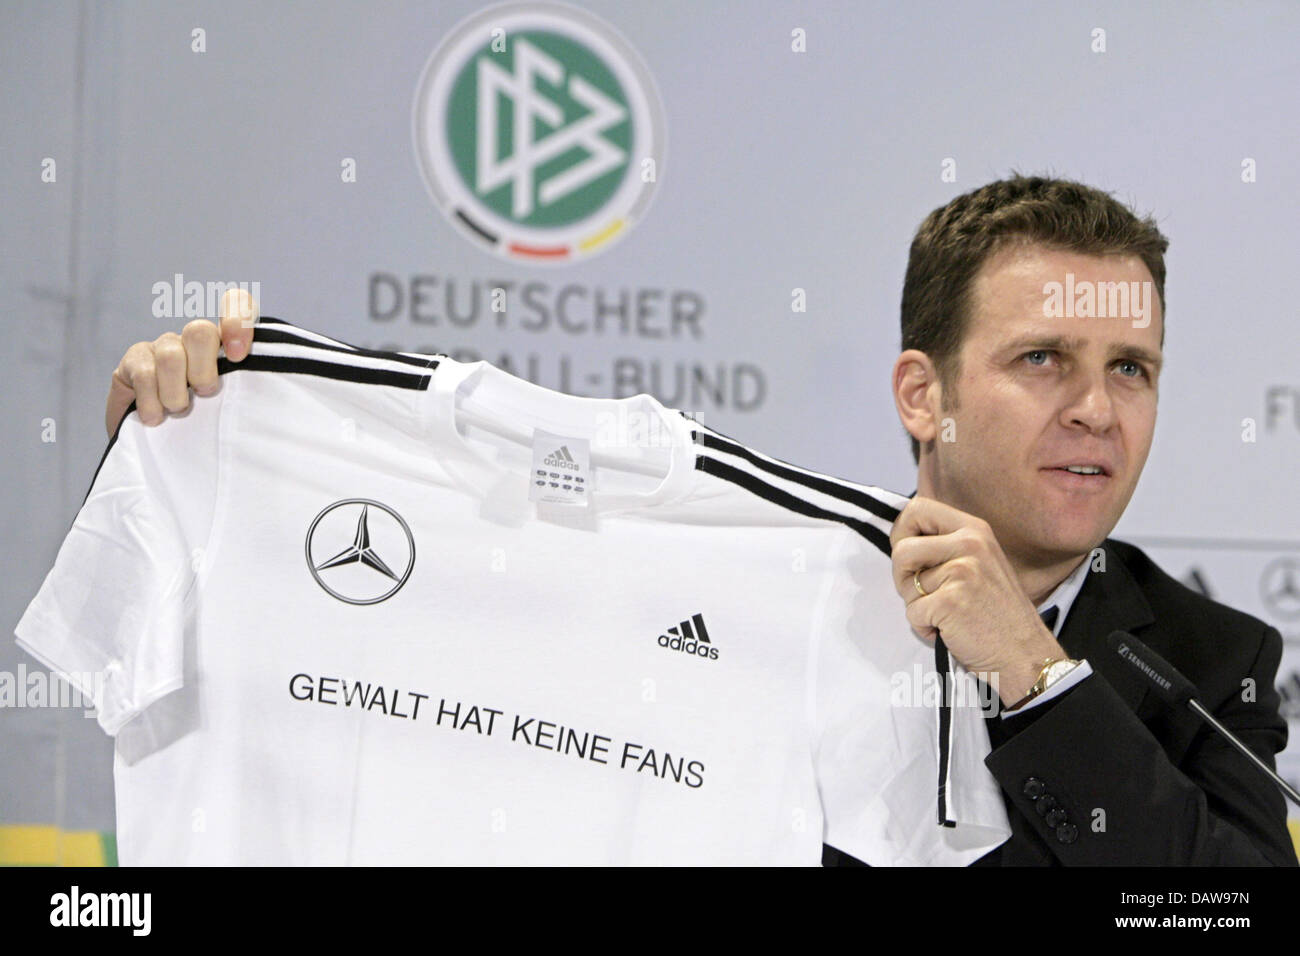 Manager of the German national team Oliver Bierhoff presents a jersey reading 'Violence has no fans' at a press conference of the German Football Association (DFB) in Hanover, Germany, Friday, 16 March 2007. The German side and the coaching staff will present themselves wearing those jerseys before the matches. Loew announced the team for the EURO 2008 qualifier vs Czech Republic o Stock Photo